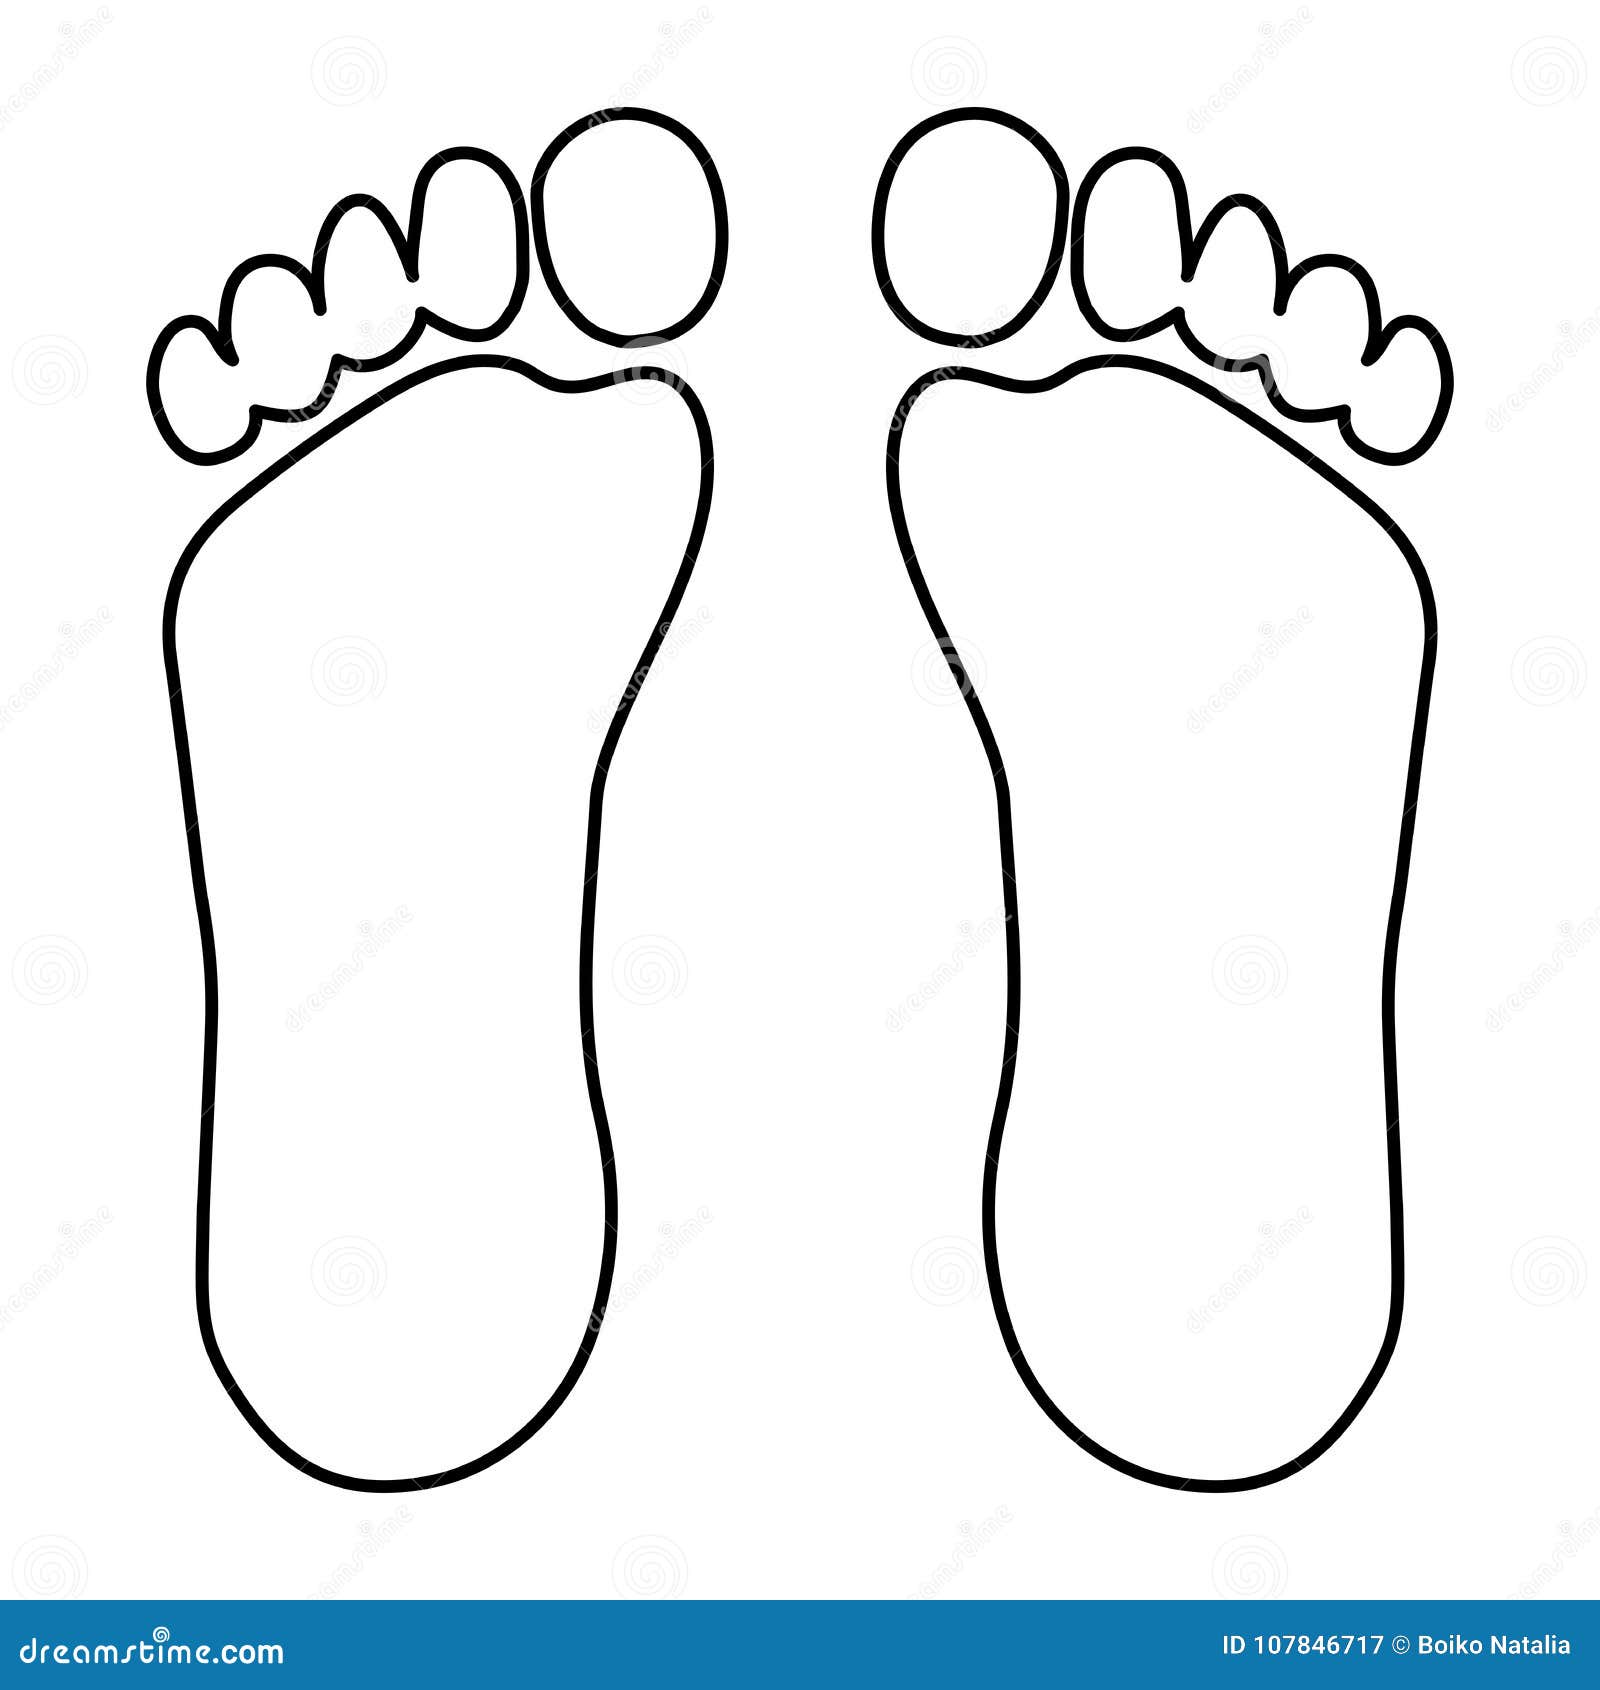 Footprint from foot stock vector. Illustration of shoeprint - 107846717